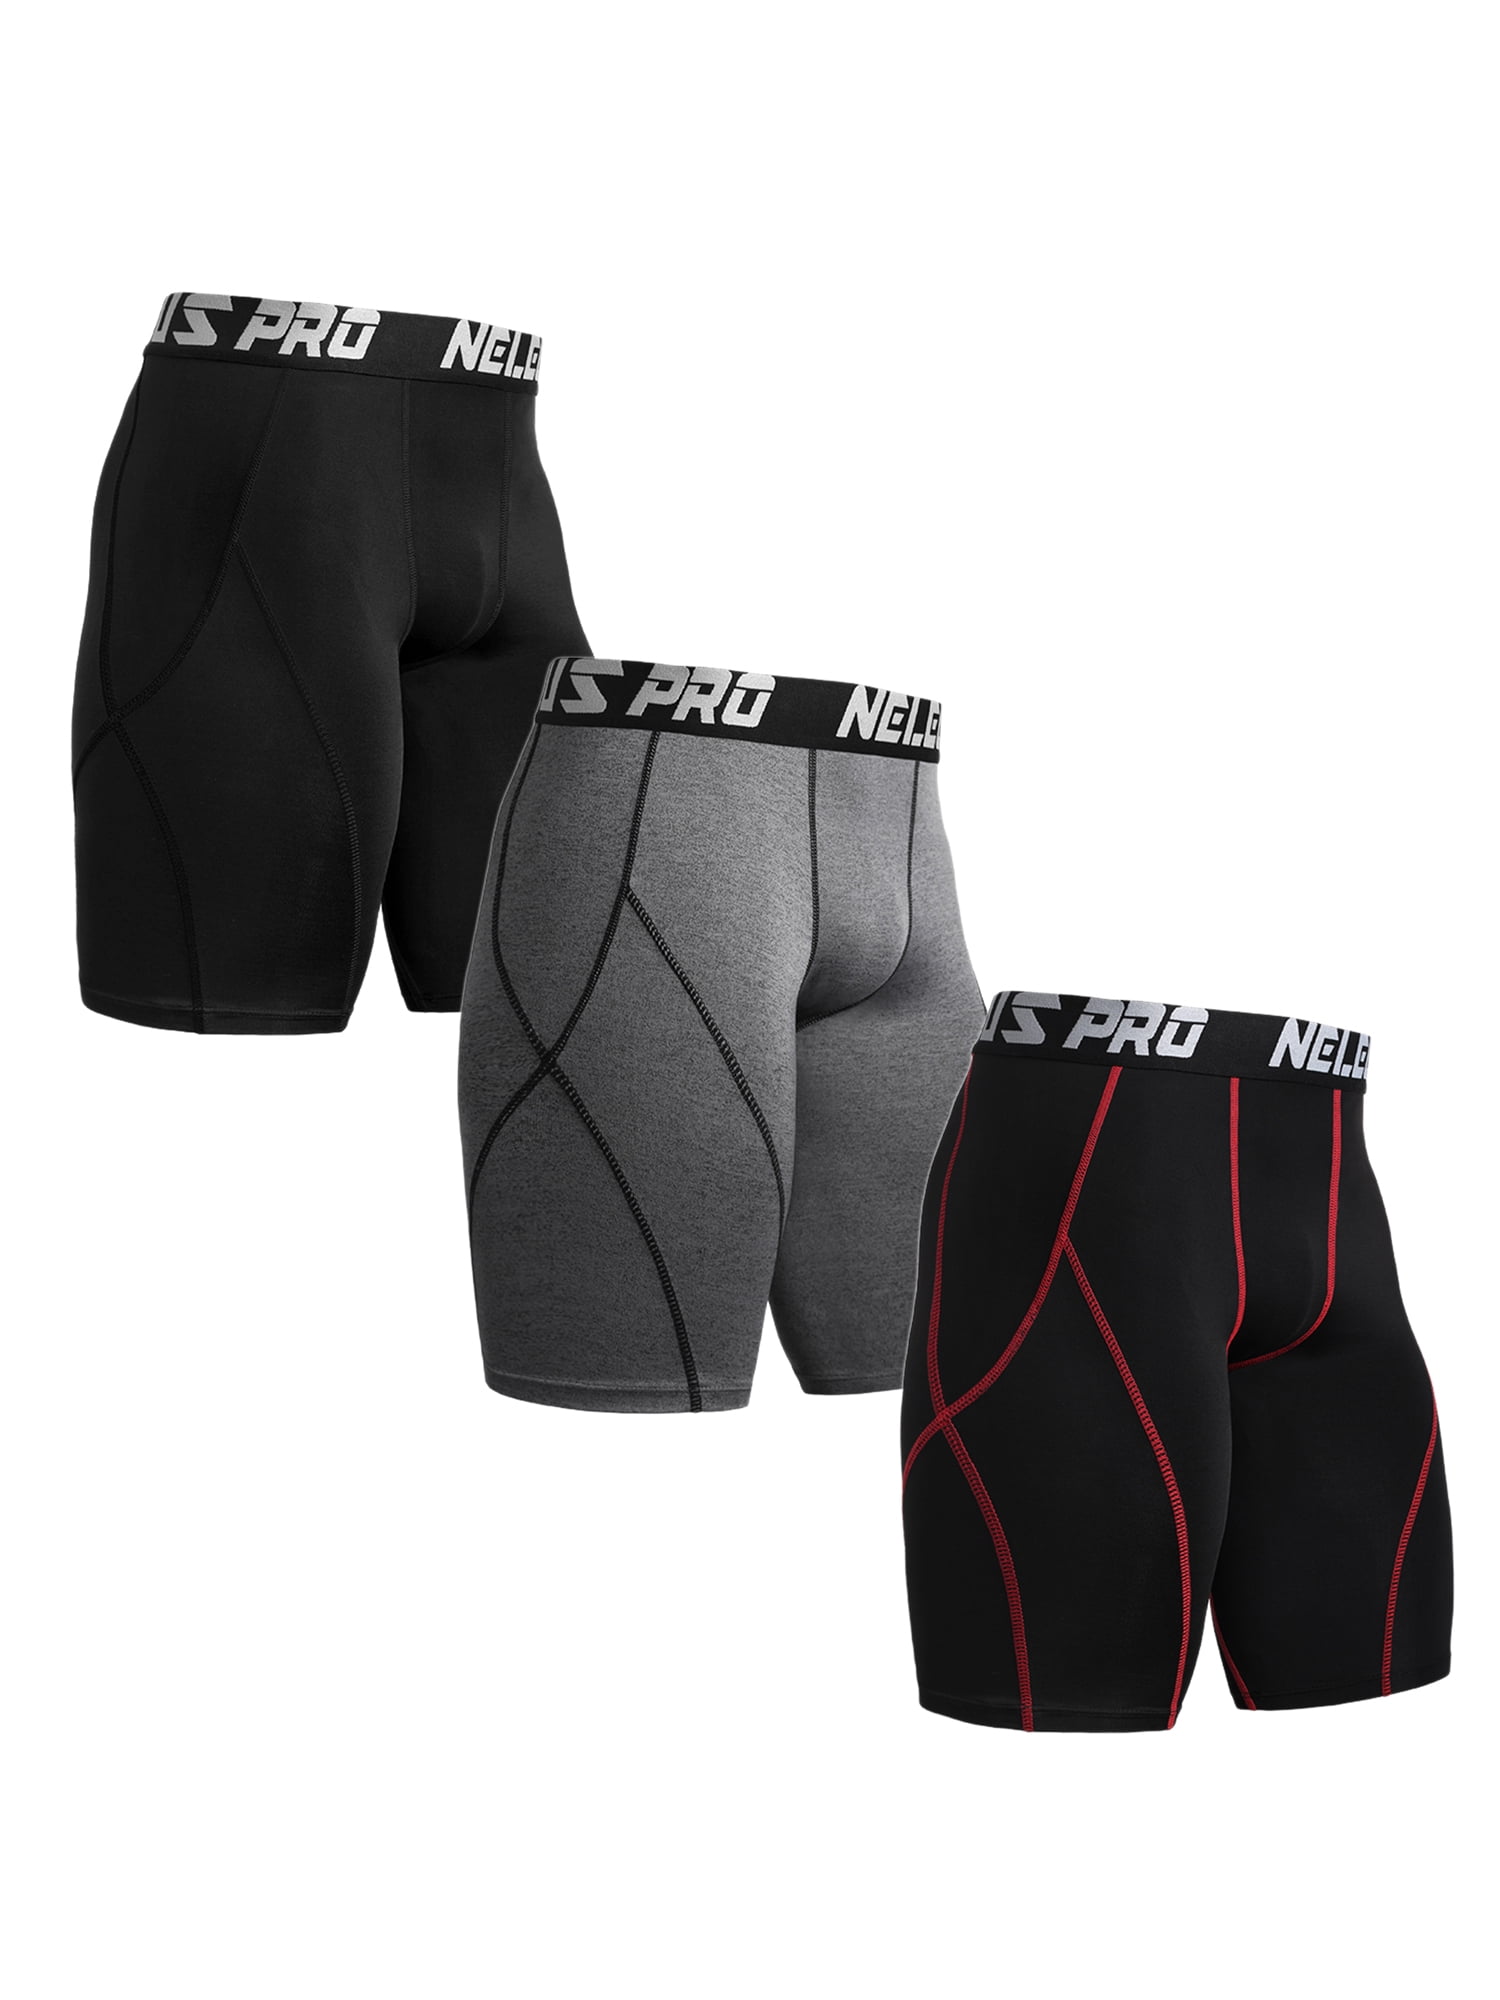 Mens Compression Athletic Base Layers Gym Running Tights Shorts Moisture Wicking 